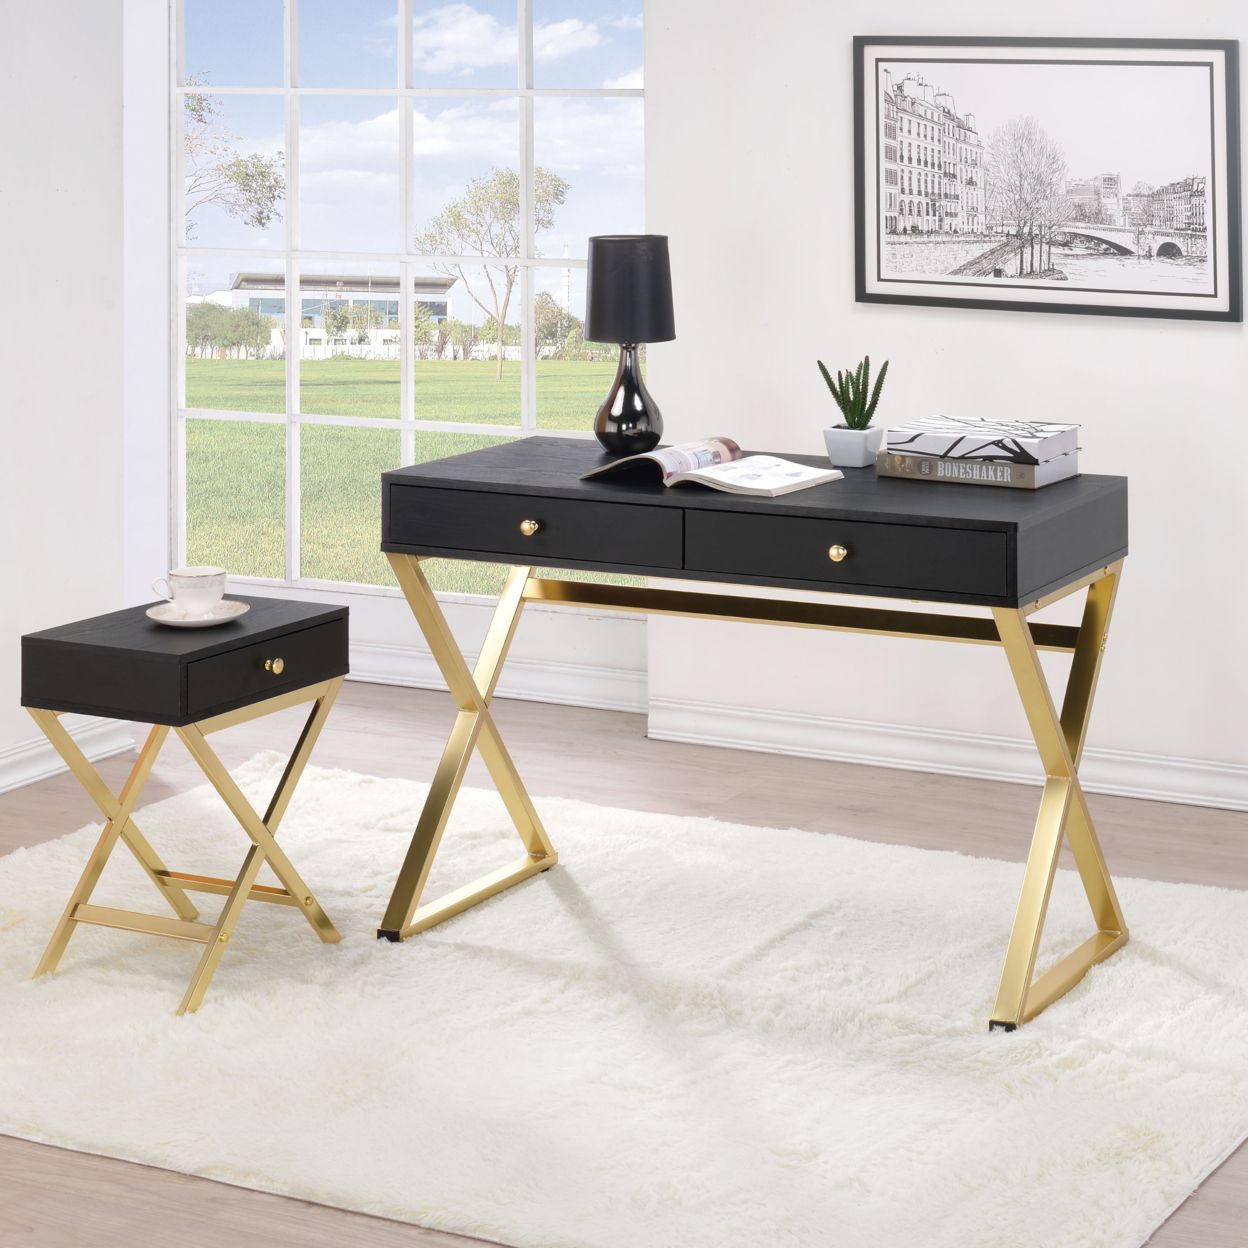 Rectangular Two Drawer Wooden Desk With "x" Shape Metal Legs, Black And Intended For Gold Metal Rectangular Writing Desks (View 5 of 15)